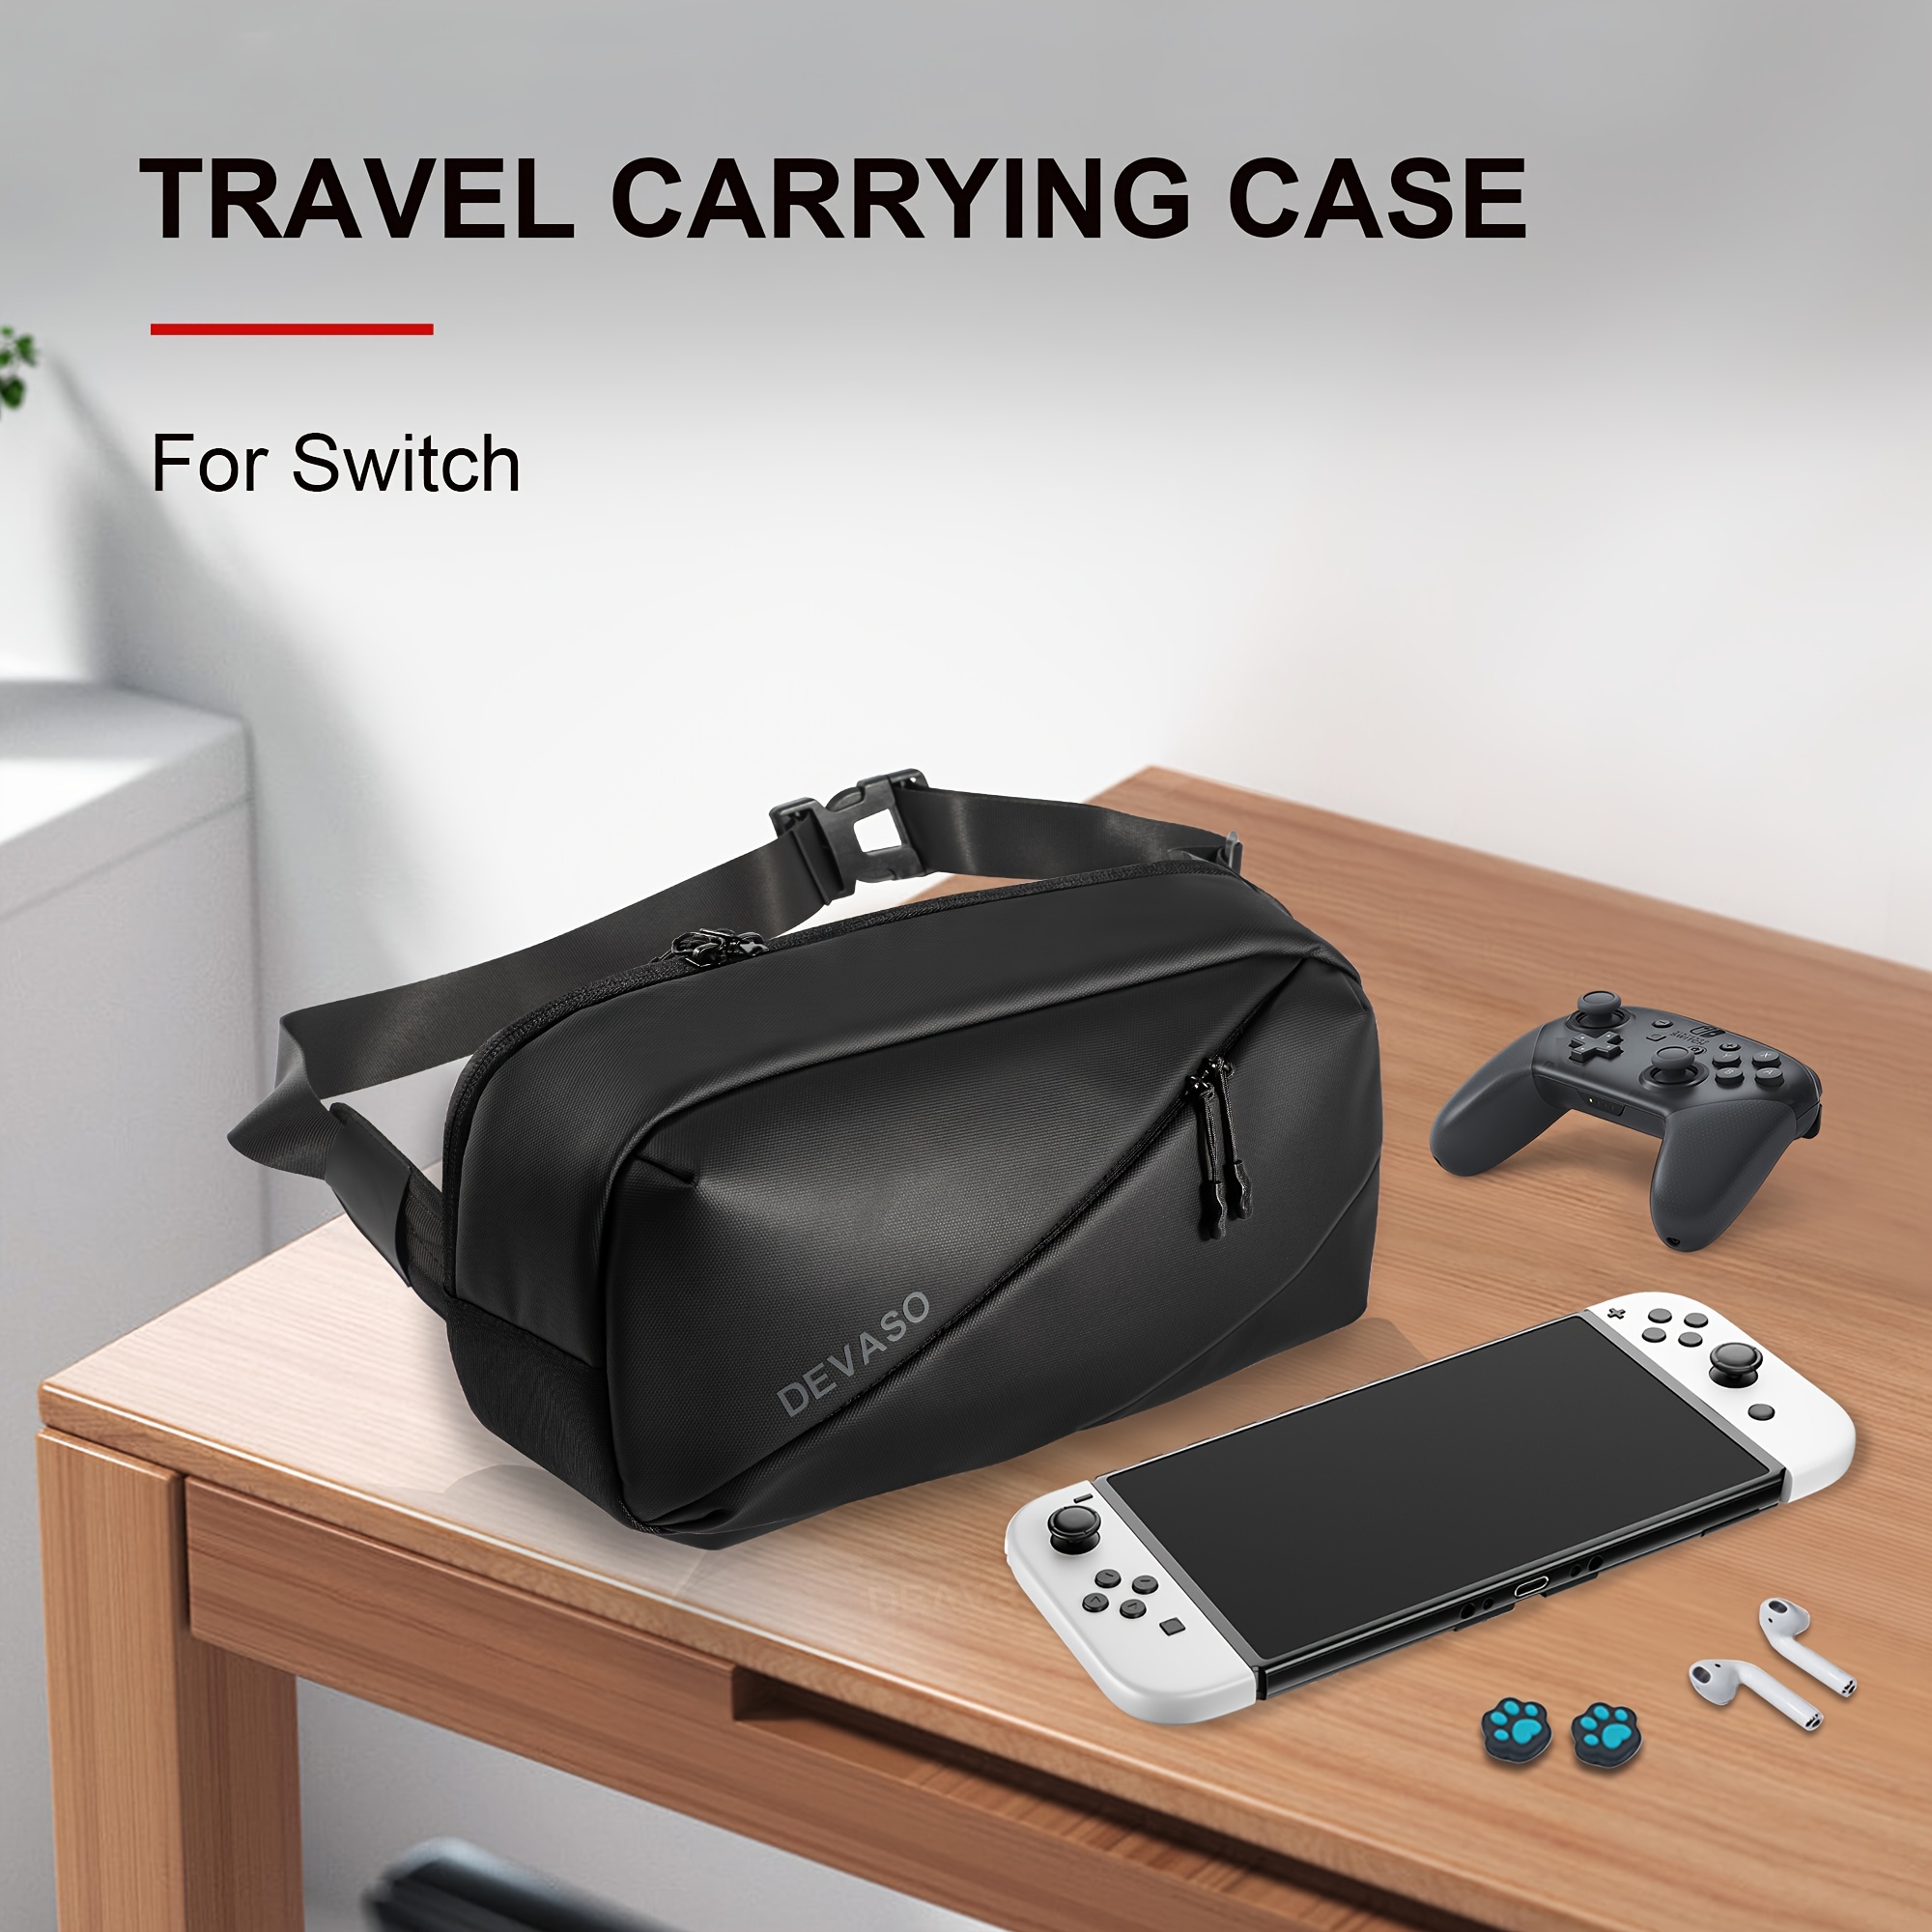 Carrying Case for Steam Deck / ASUS ROG Ally, Upgraded Large